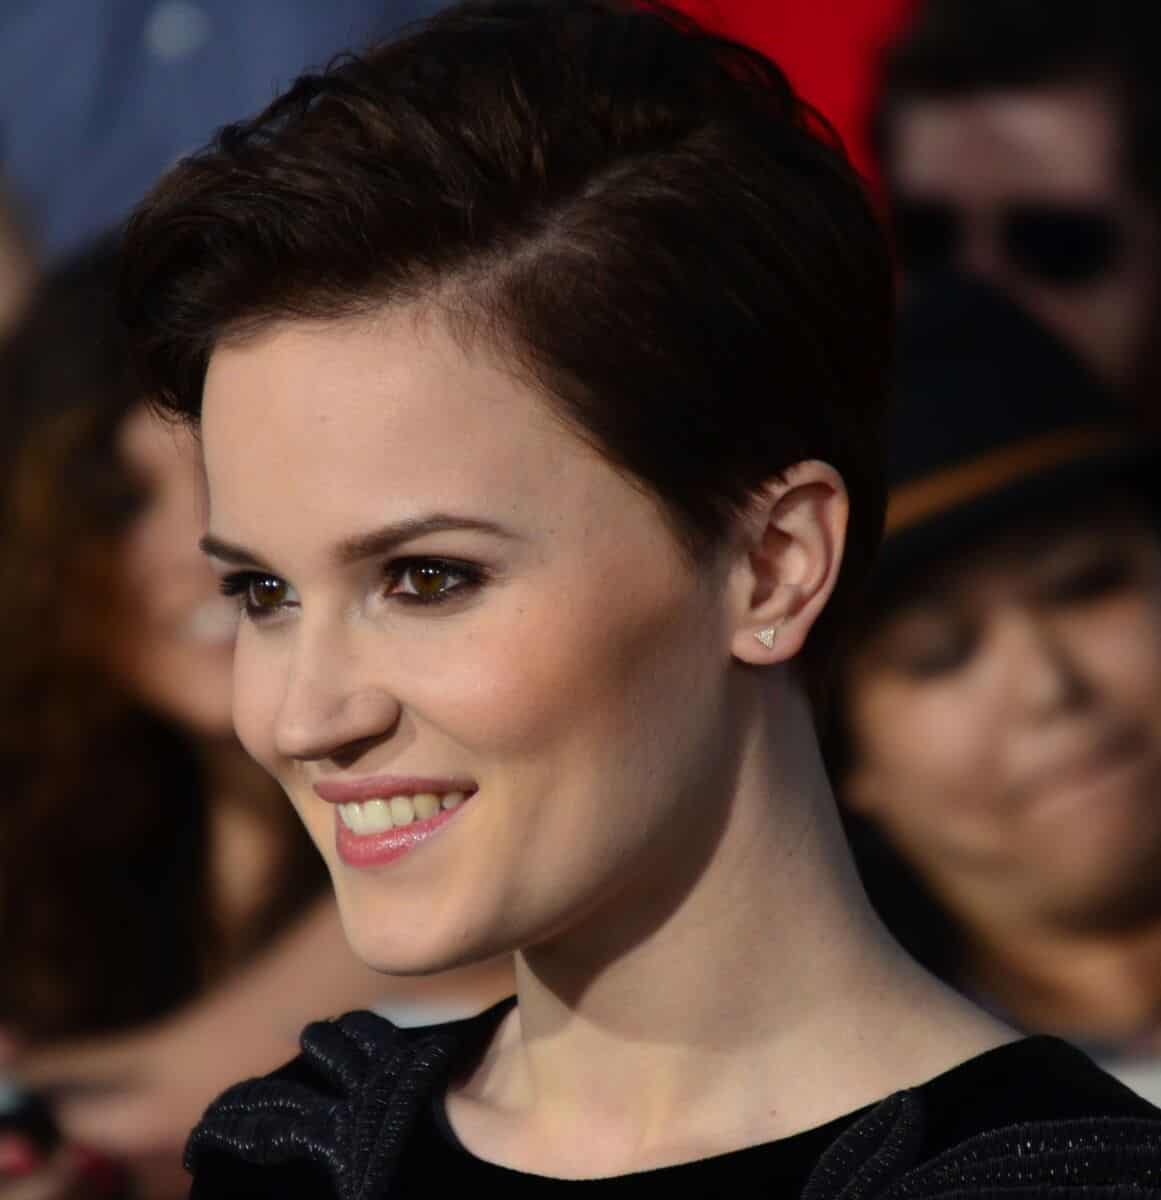 Veronica Roth - Famous Author